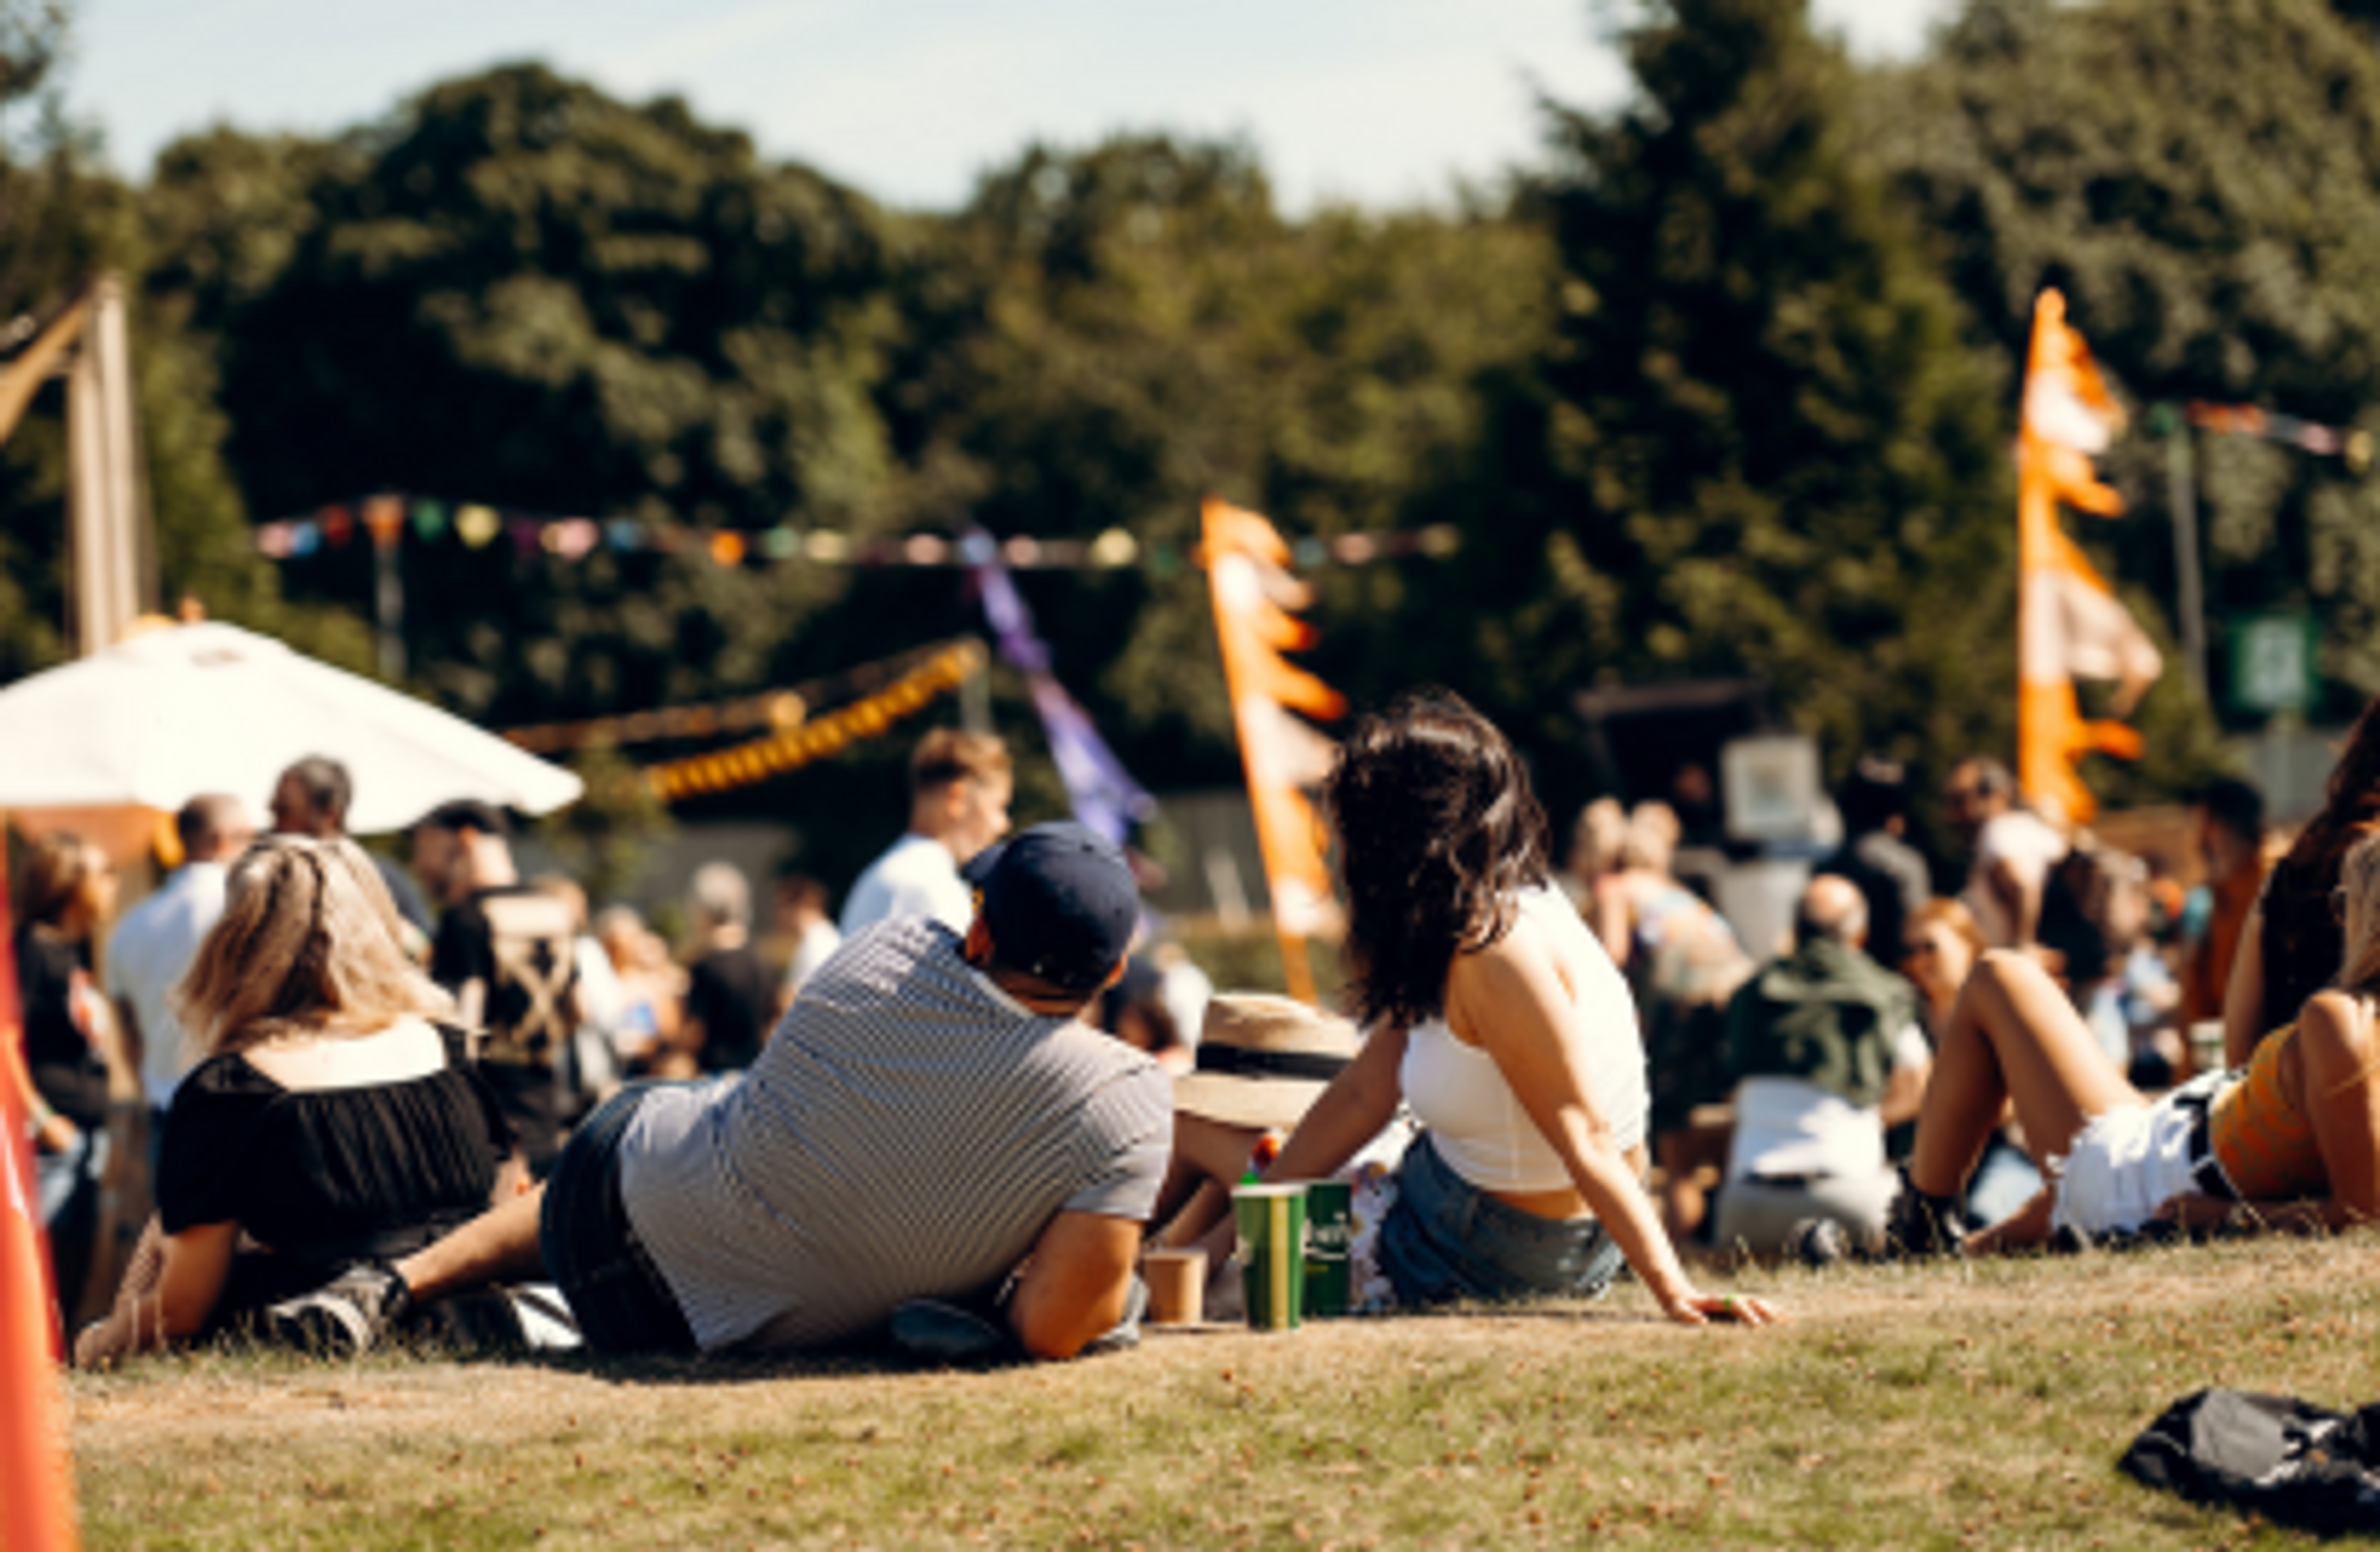 People relaxing on the grass at a festival